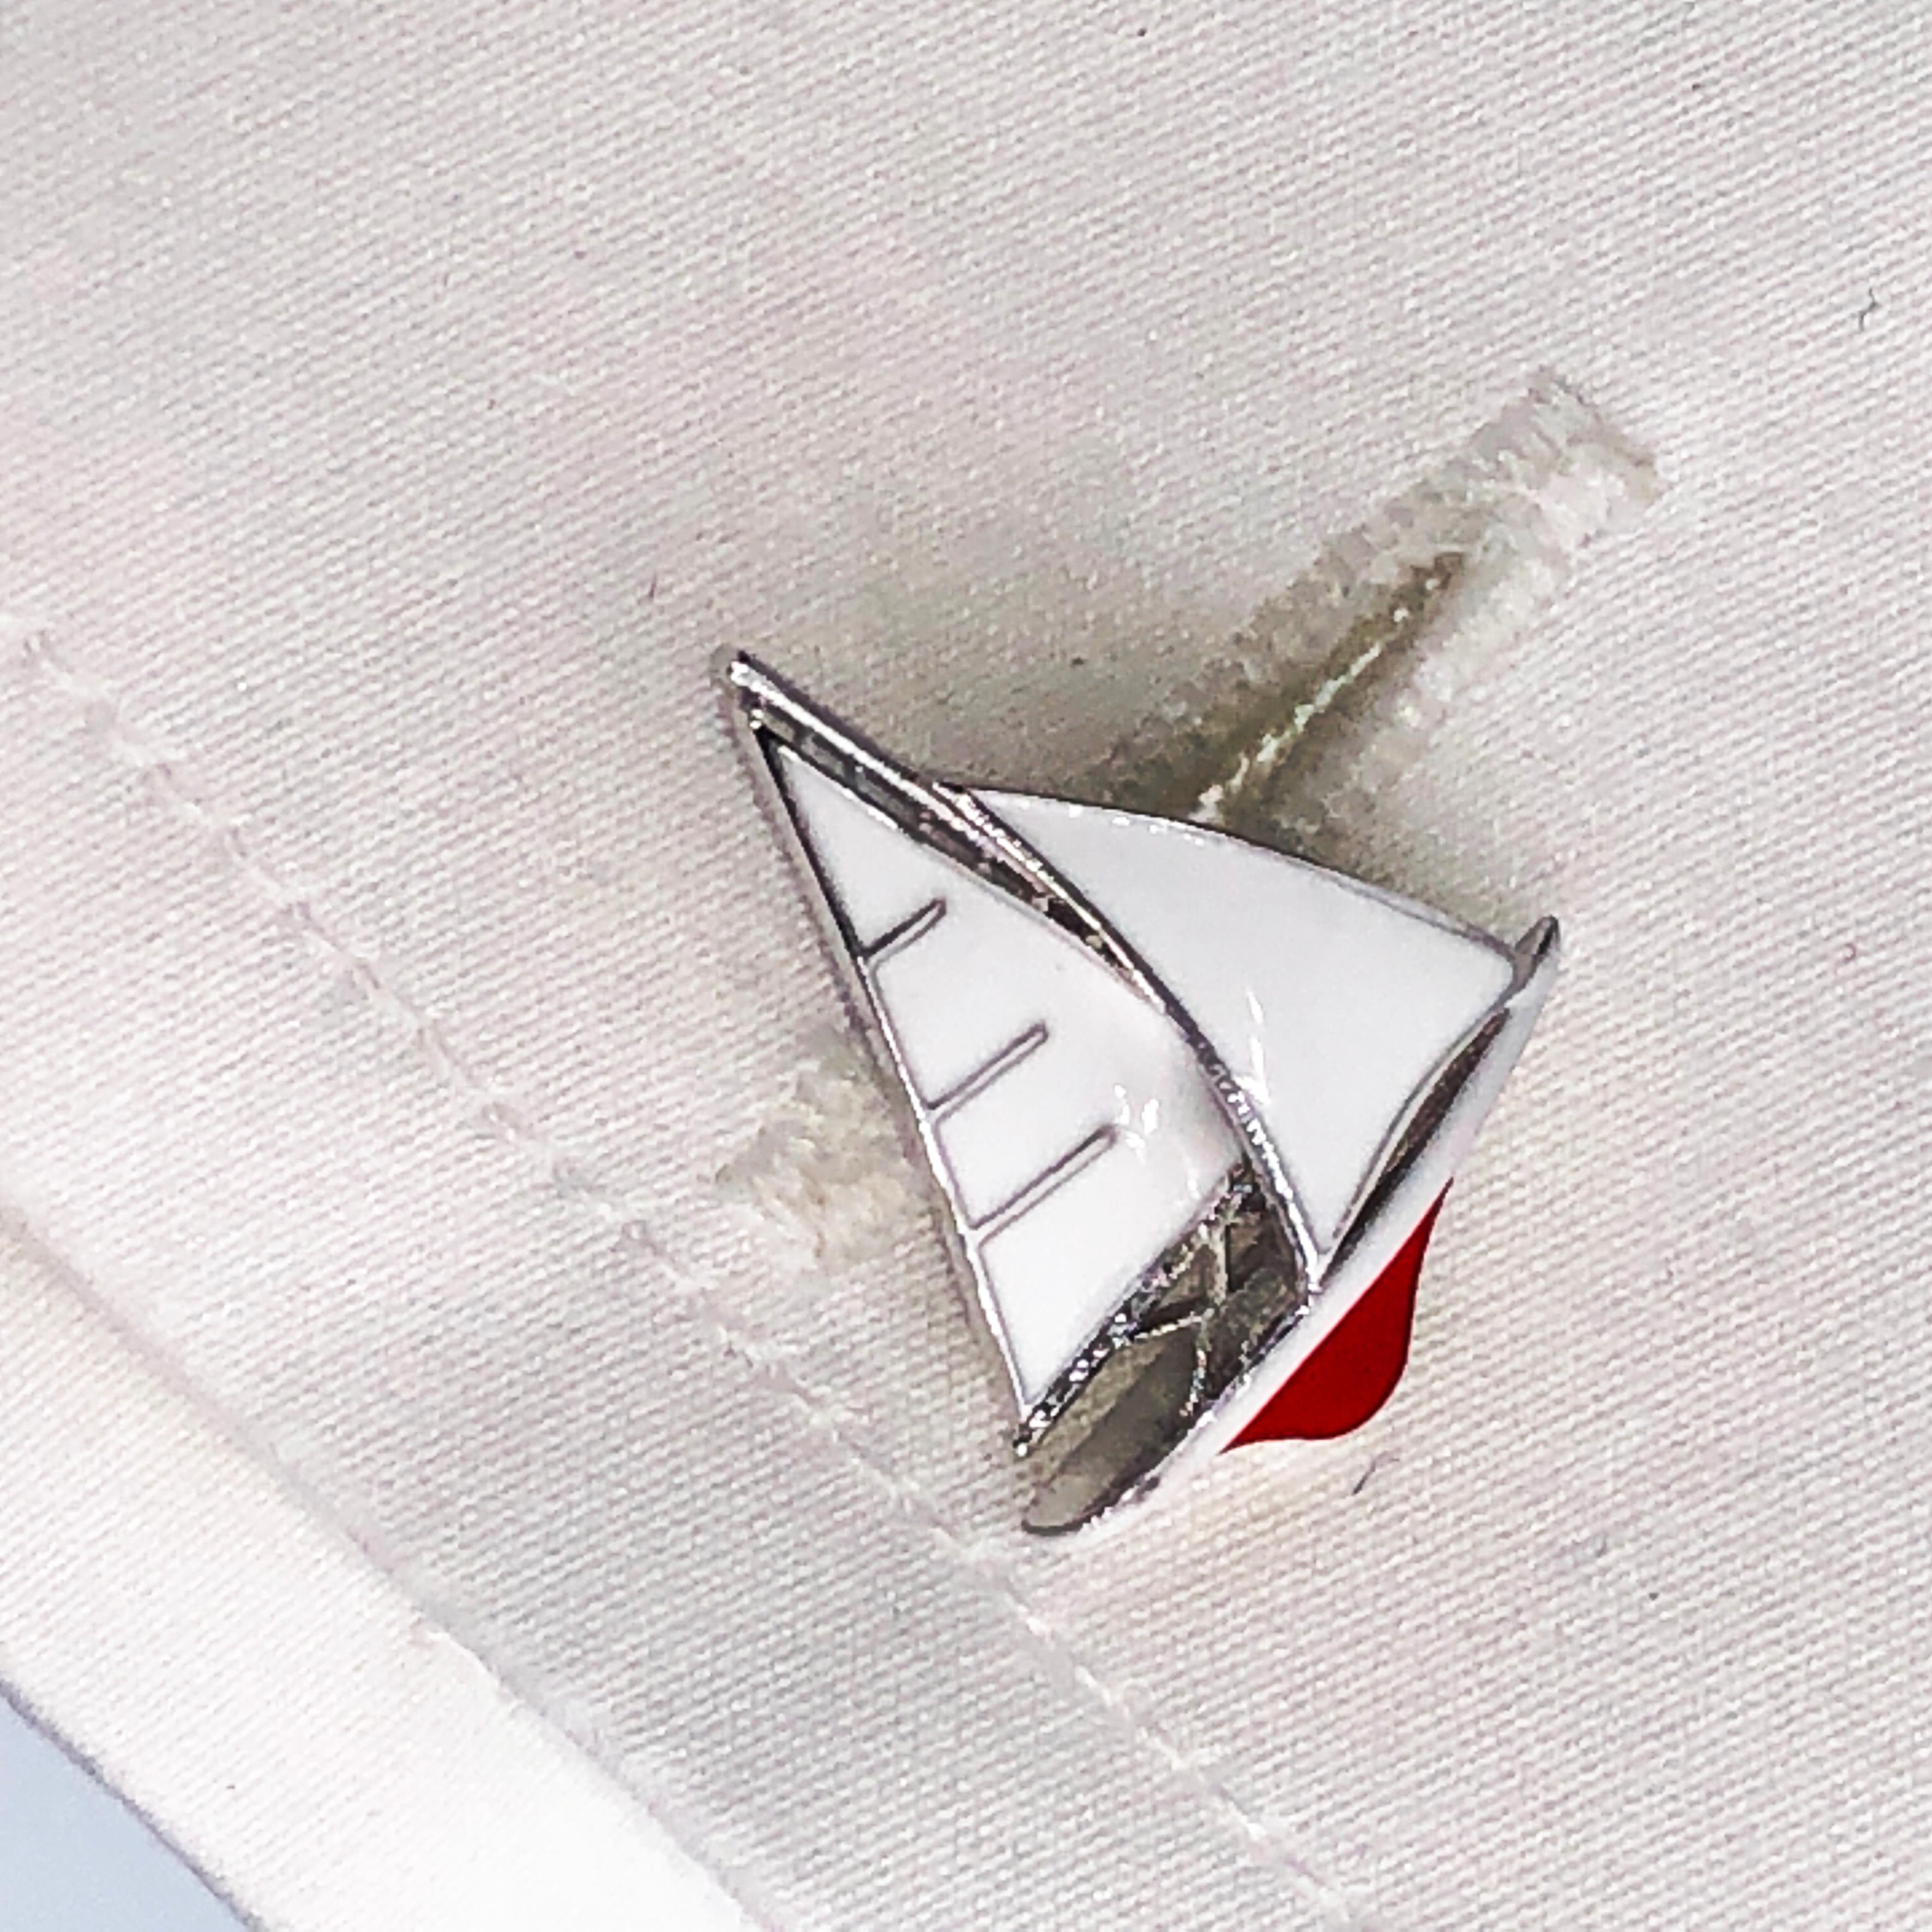 Berca White Red Sailing Boat Shaped Little Anchor Back Sterling Silver Cufflinks In New Condition For Sale In Valenza, IT